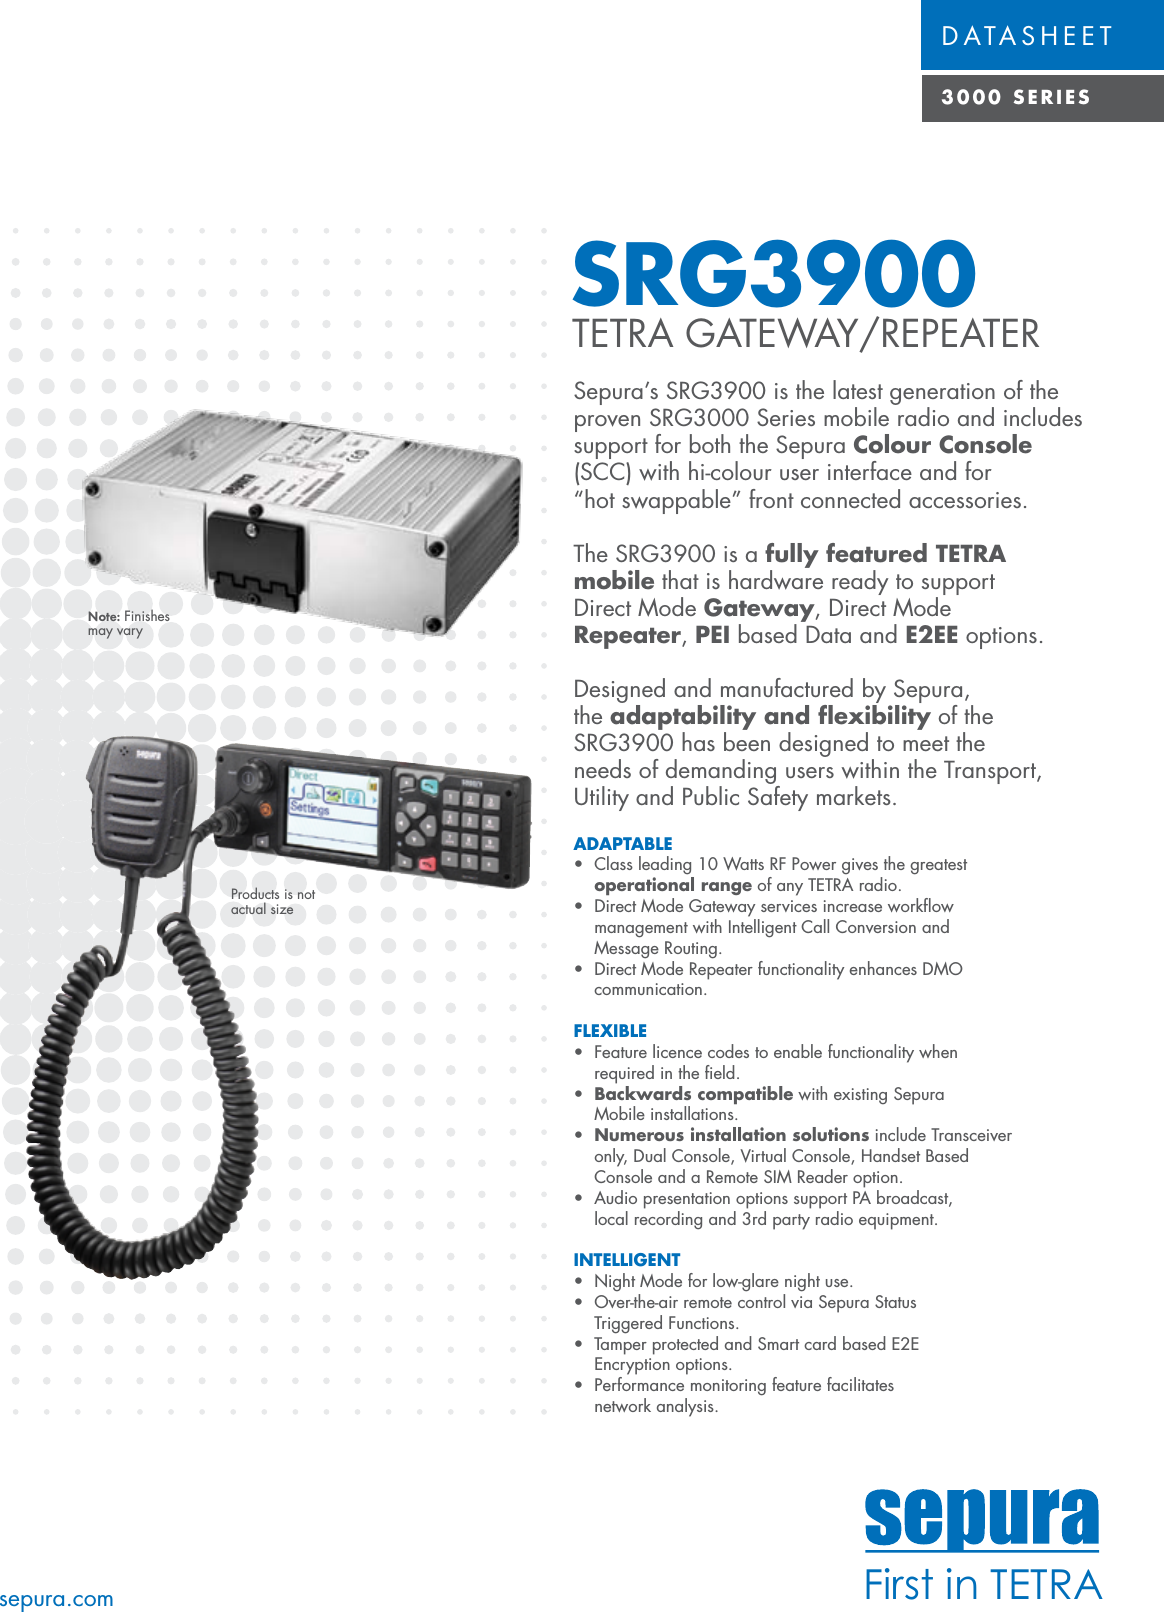 First in TETRADATASHEET3000 SERIESSRG3900 TETRA GATEWAY/REPEATERSepura’s SRG3900 is the latest generation of the proven SRG3000 Series mobile radio and includes support for both the Sepura Colour Console (SCC) with hi-colour user interface and for “hot swappable” front connected accessories.The SRG3900 is a fully featured TETRA mobile that is hardware ready to support Direct Mode Gateway, Direct Mode Repeater, PEI based Data and E2EE options.Designed and manufactured by Sepura, the adaptability and ﬂexibility of the SRG3900 has been designed to meet the needs of demanding users within the Transport, Utility and Public Safety markets. sepura.comADAPTABLE • Classleading10WattsRFPowergivesthegreatest operational range of any TETRA radio.• DirectModeGatewayservicesincreaseworkow management with Intelligent Call Conversion and   Message Routing.• DirectModeRepeaterfunctionalityenhancesDMO communication. FLEXIBLE • Featurelicencecodestoenablefunctionalitywhen required in the ﬁeld.•  Backwards  compatible with existing Sepura   Mobile installations.• Numerous installation solutions include Transceiver   only, Dual Console, Virtual Console, Handset Based   Console and a Remote SIM Reader option.• AudiopresentationoptionssupportPAbroadcast, local recording and 3rd party radio equipment.INTELLIGENT • NightModeforlow-glarenightuse.• Over-the-airremotecontrolviaSepuraStatus Triggered Functions.• TamperprotectedandSmartcardbasedE2E  Encryption  options.• Performancemonitoringfeaturefacilitates  network analysis.Products is not actual sizeNote: Finishes may vary